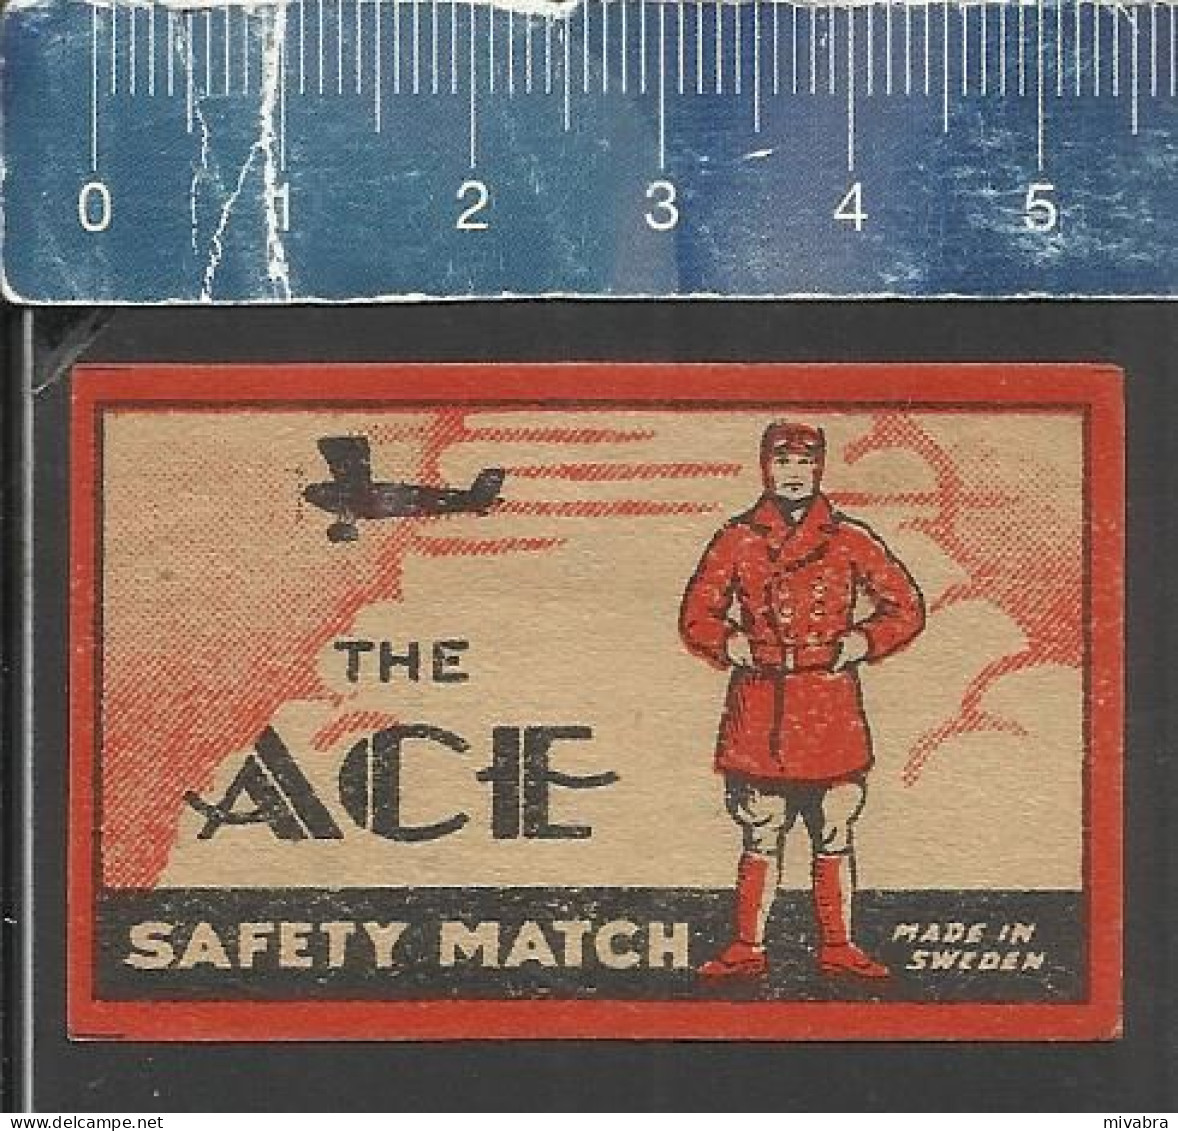 THE ACE (flying Ace Fighter Ace Or Air Ace Is A Military Aviator Shooting Down Enemy Aircraft) OLD MATCHBOX LABEL SWEDEN - Luciferdozen - Etiketten